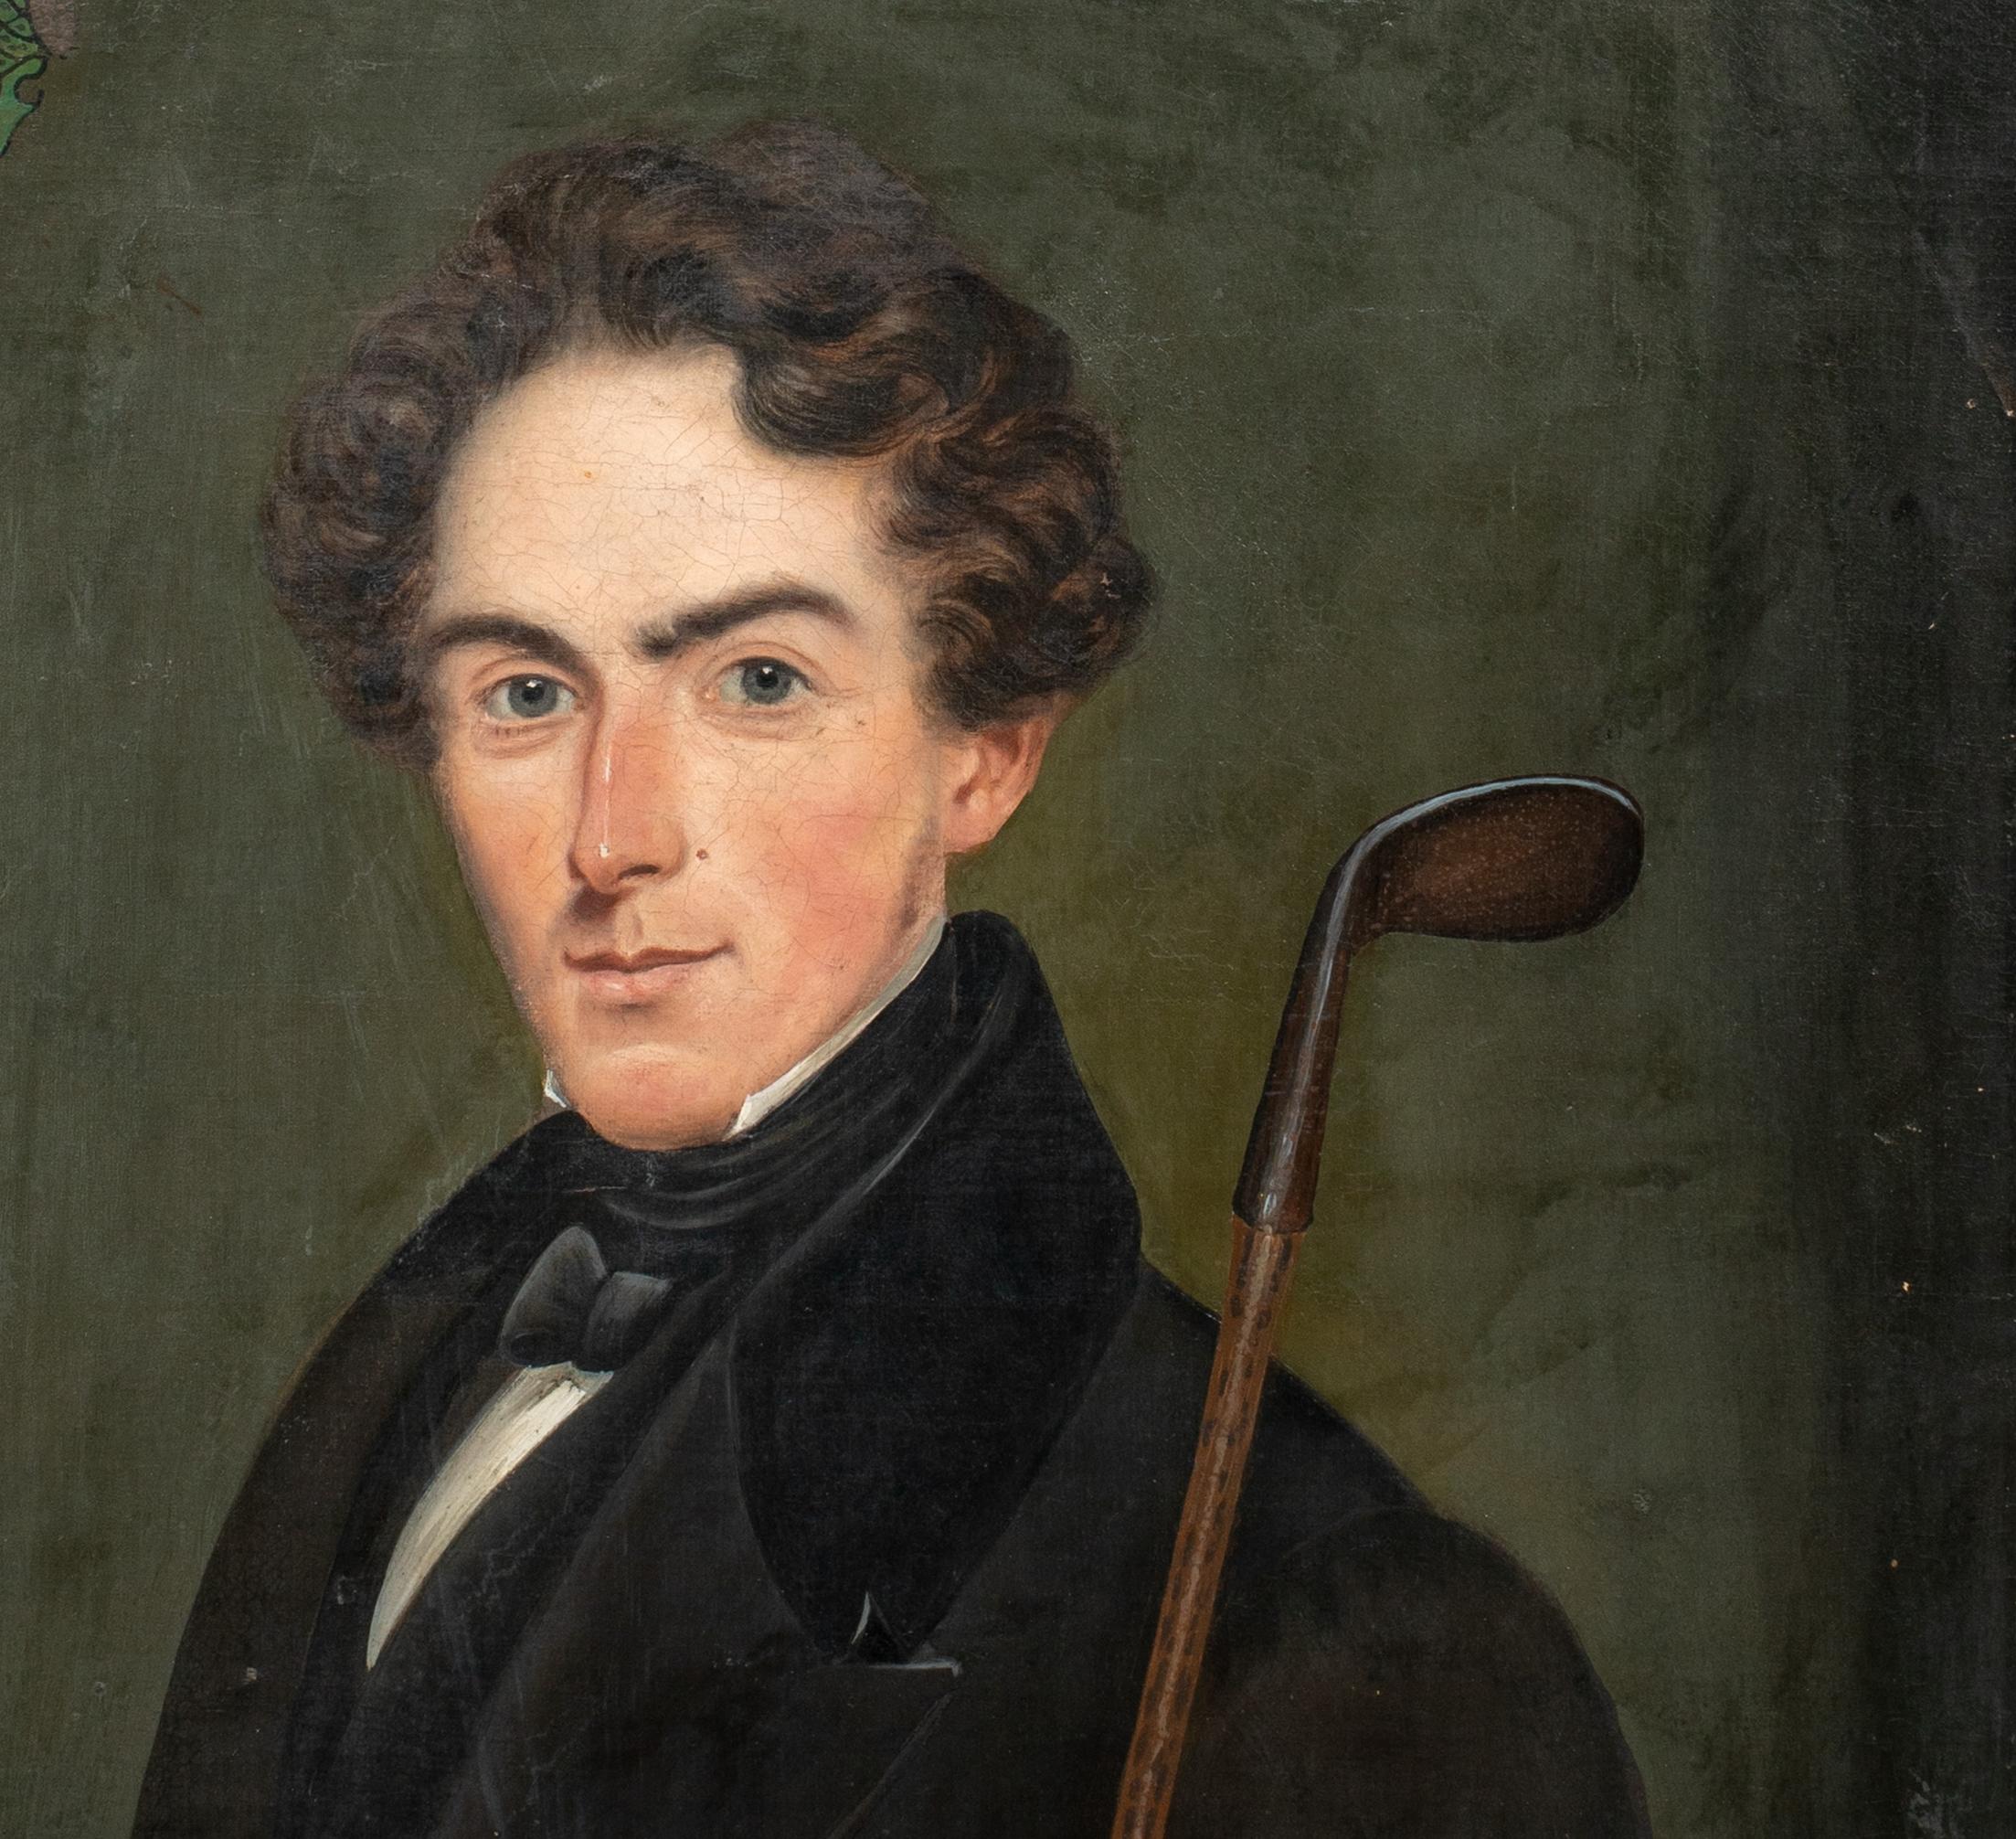 Portrait Of A Gentleman With A Golf Club, circa 1810

English School - Rare Golfing Portrait - one of a pair with family coat of arms

Large early 19th Century English School portrait of a gentleman with a golf club, oil on canvas. Rare circa 1810